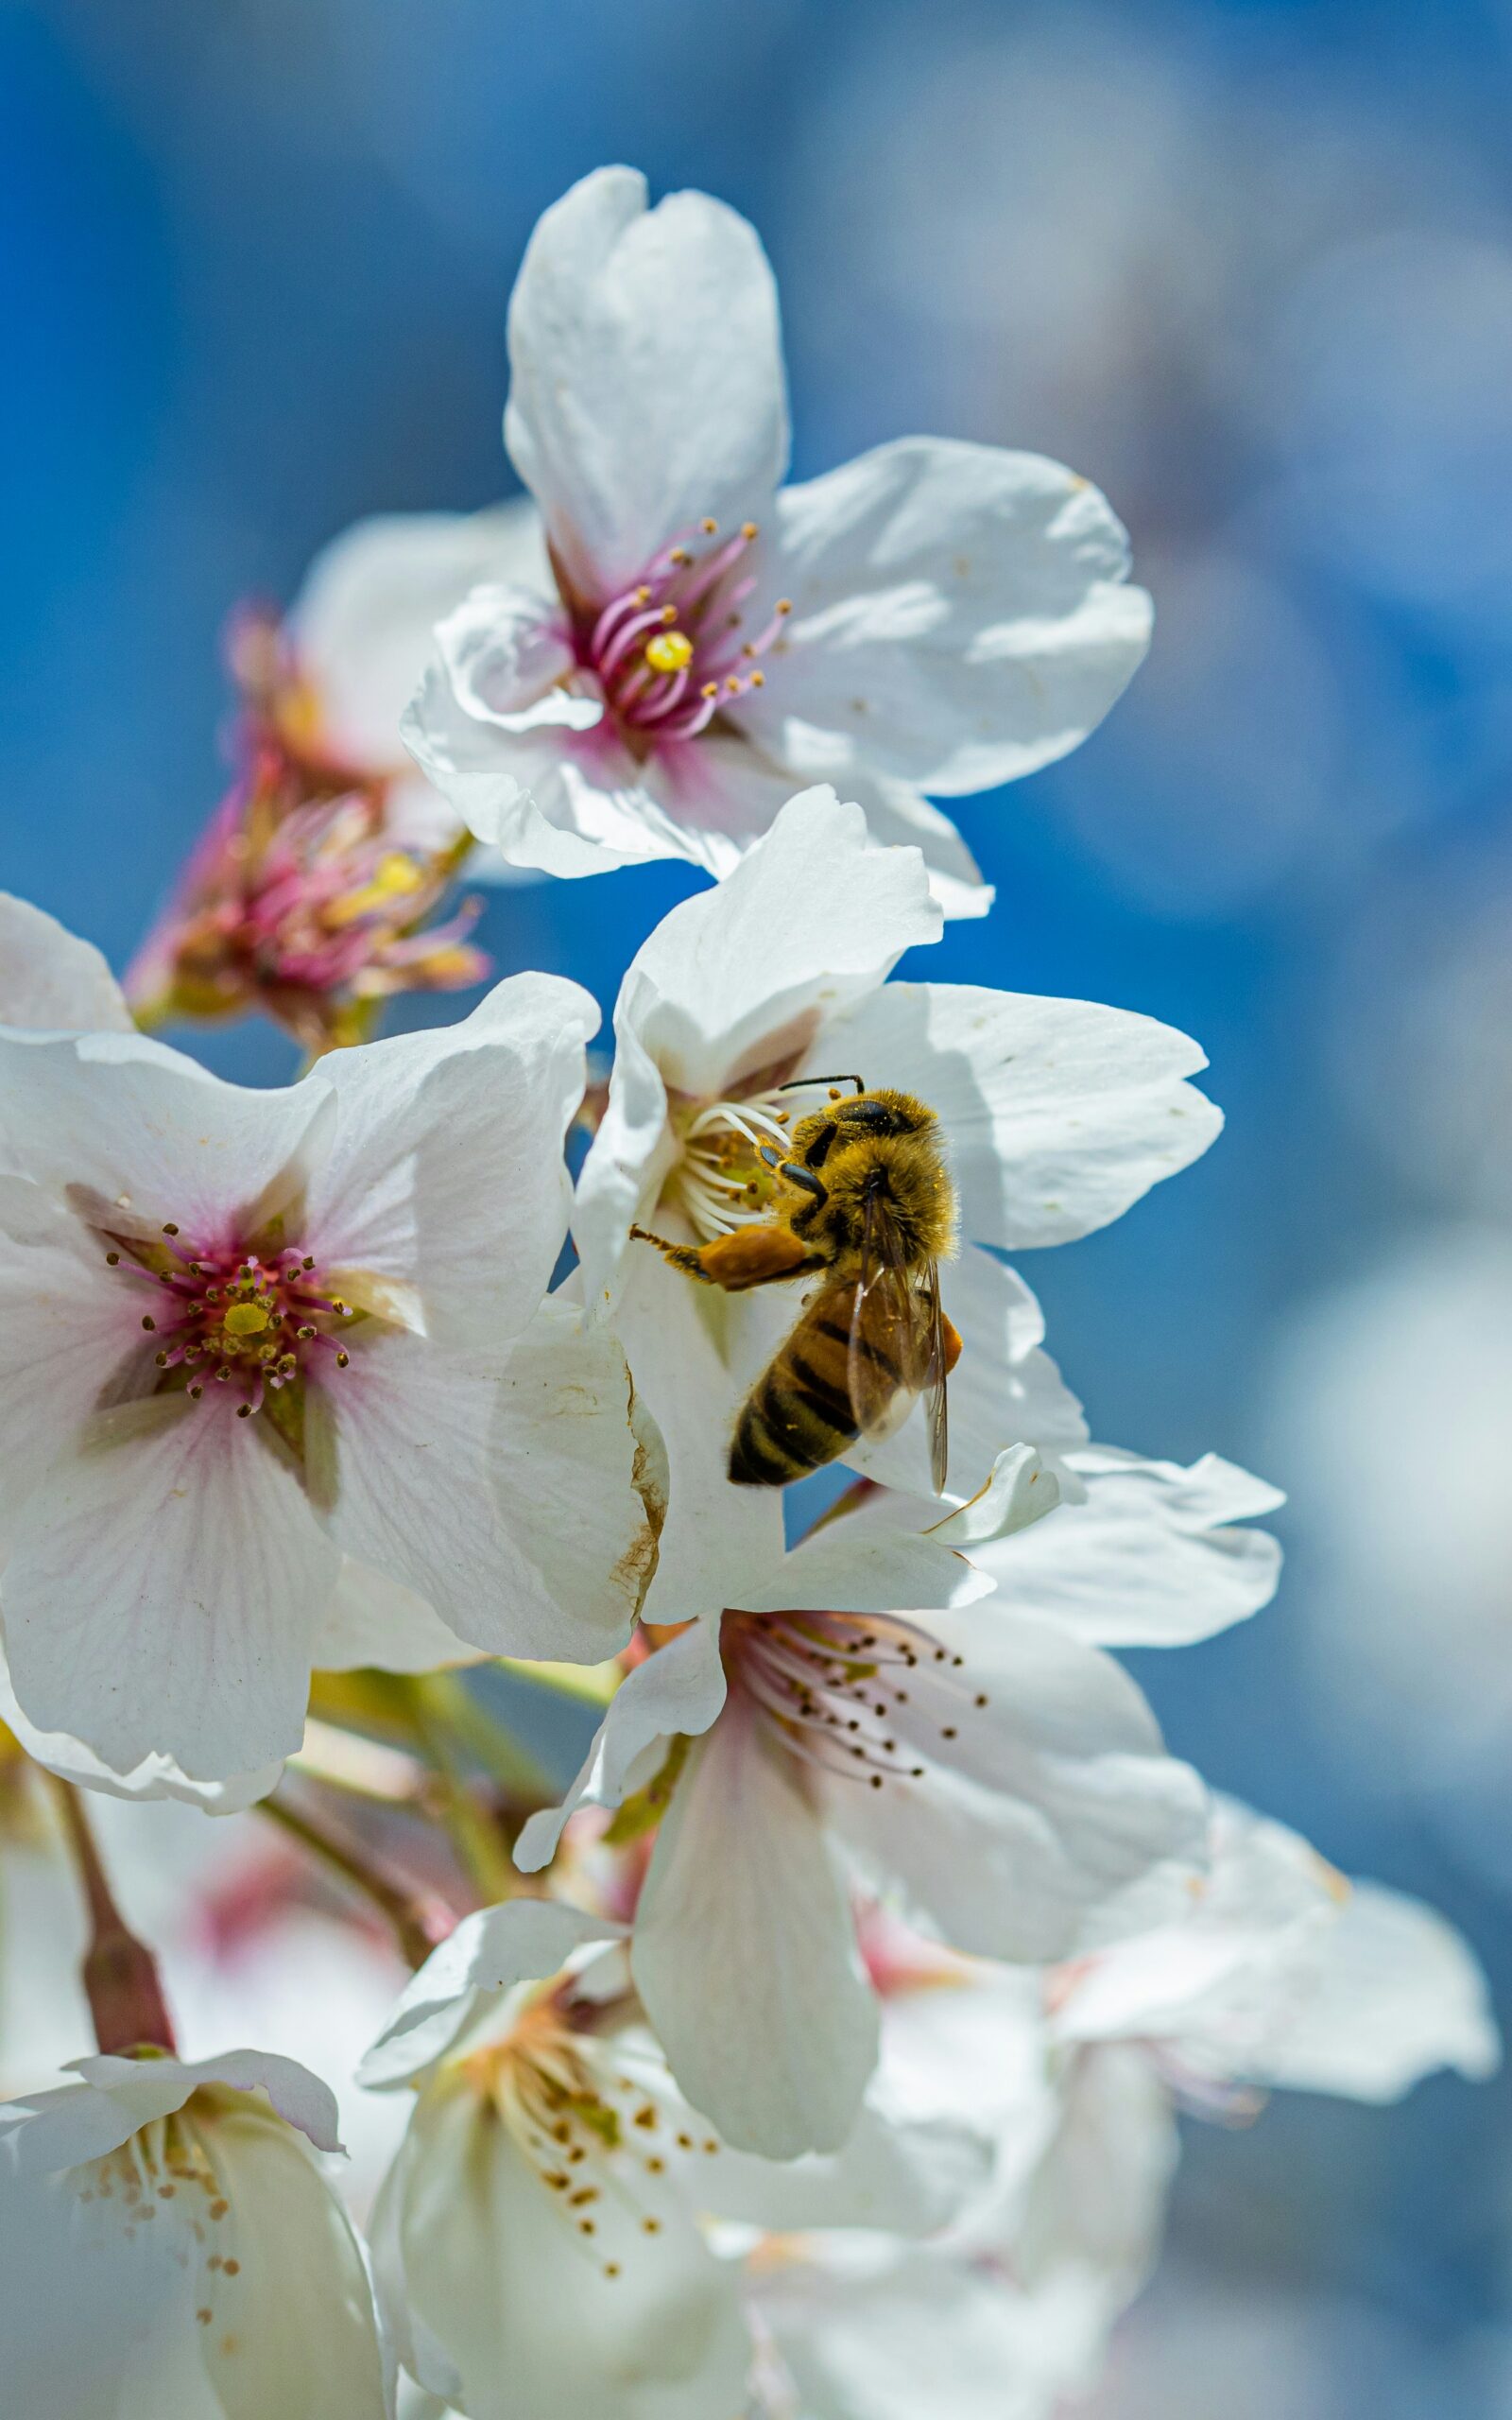 honeybee perched on white cherry blossom in close up photography during daytime